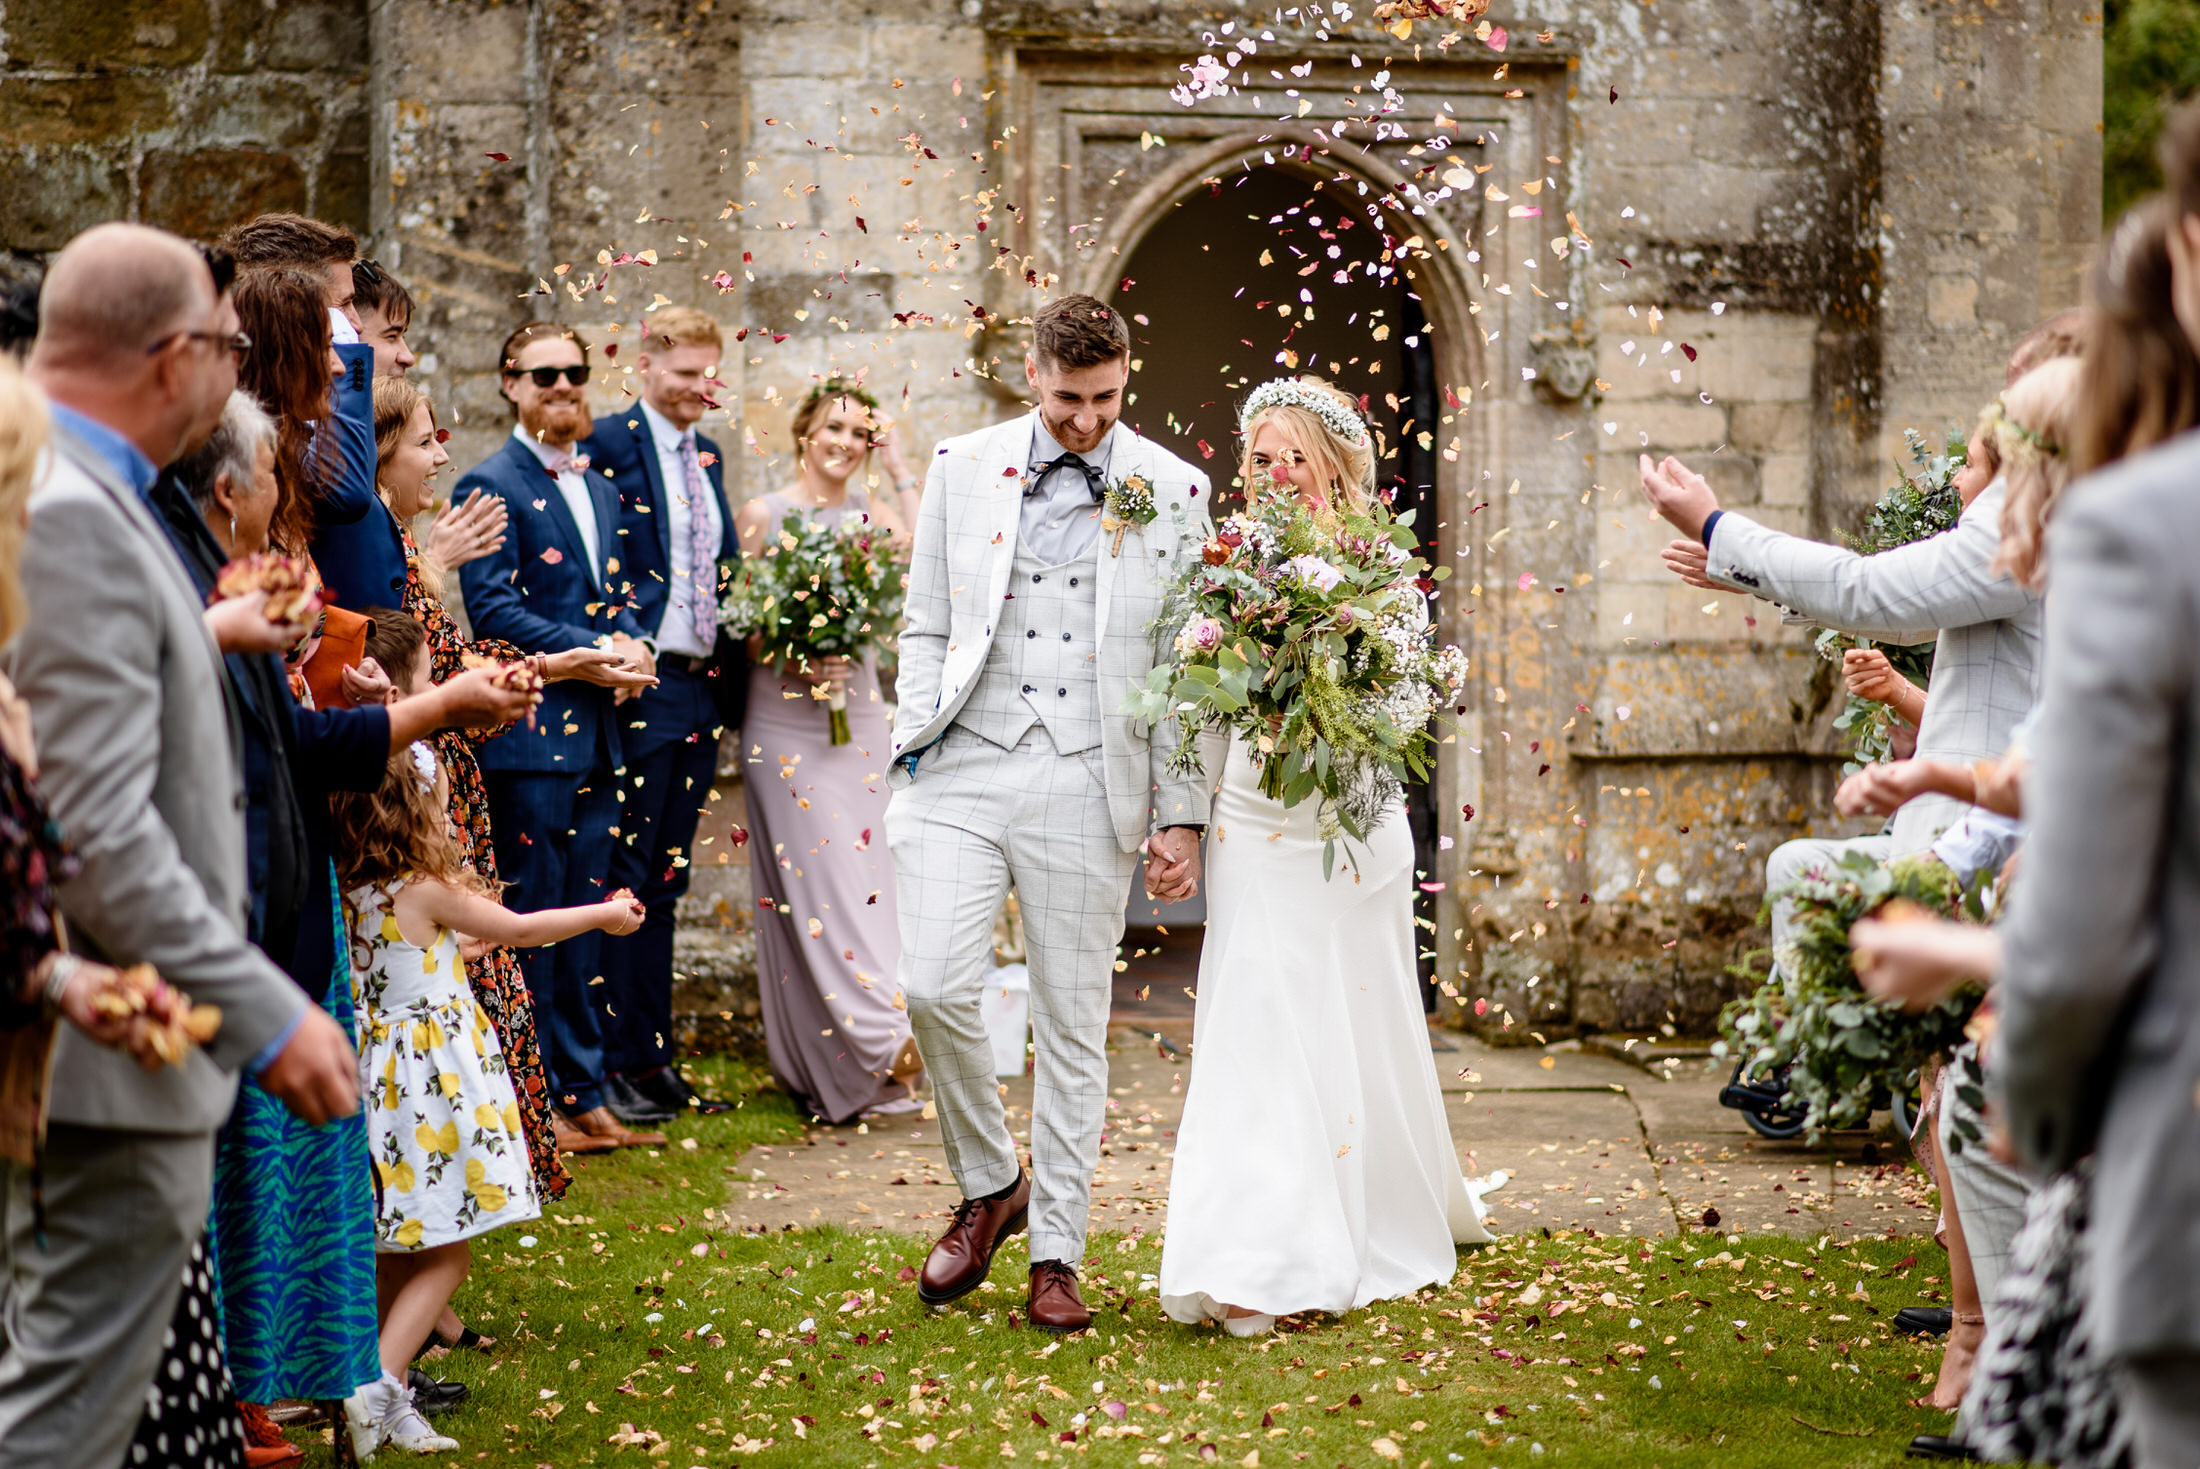 A wedding couple walks down the aisle surrounded by confetti at Scrivelsby Walled Garden.